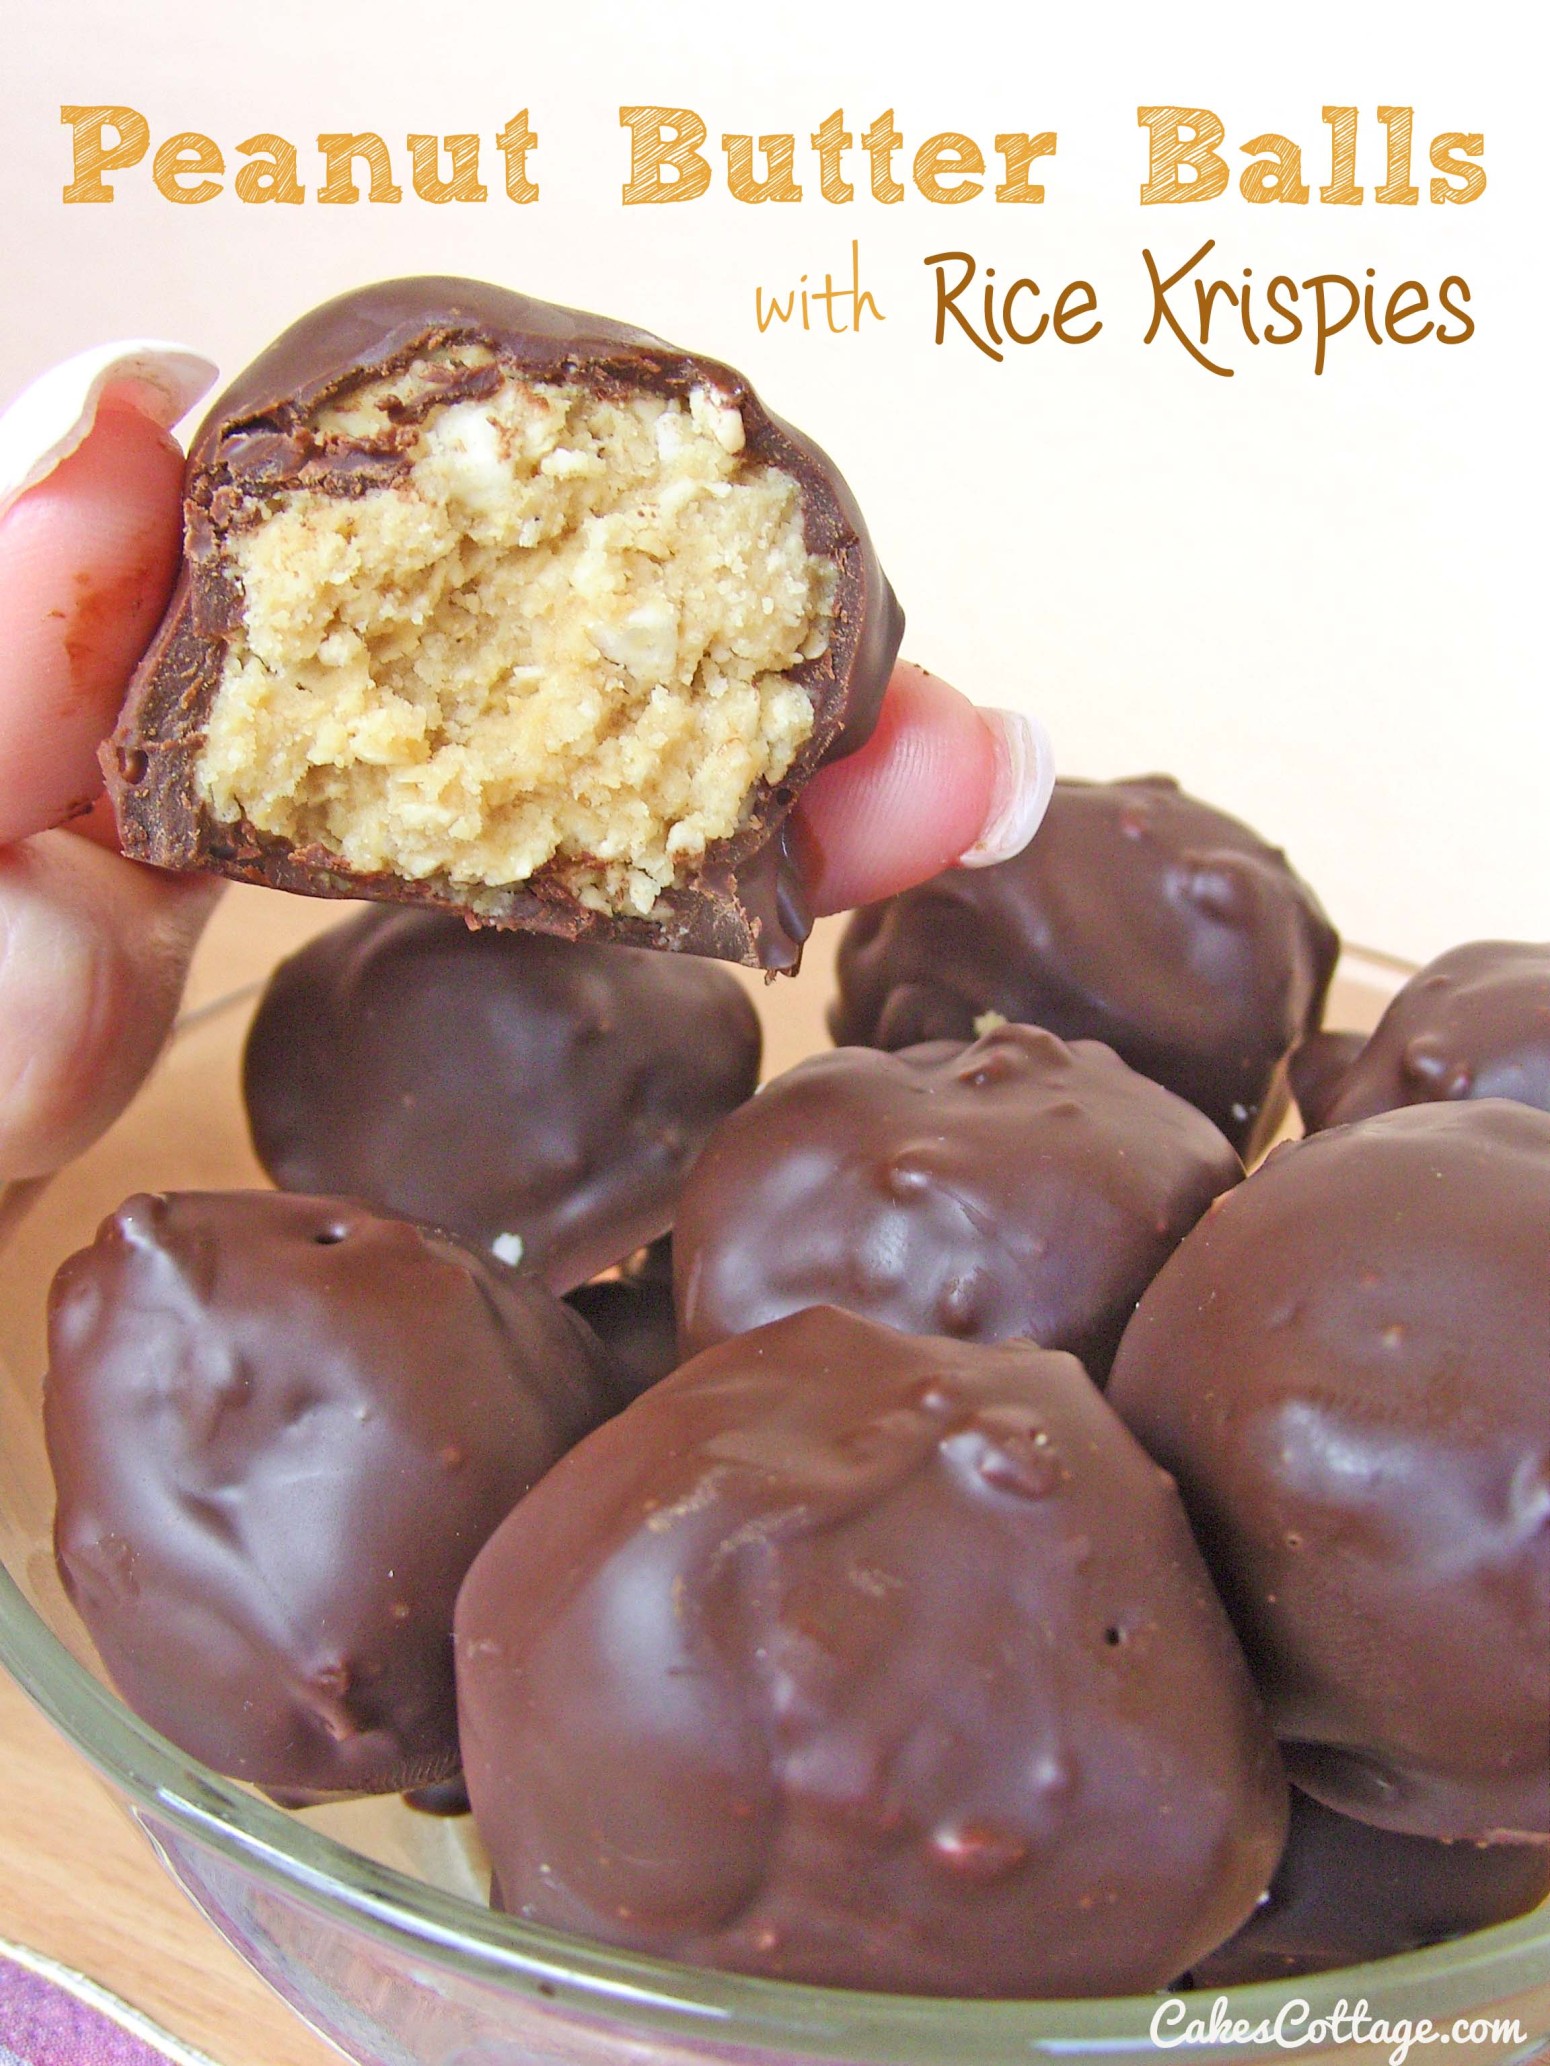 Peanut Butter Balls with Rice Krispies Recipe 2 | Just A Pinch Recipes